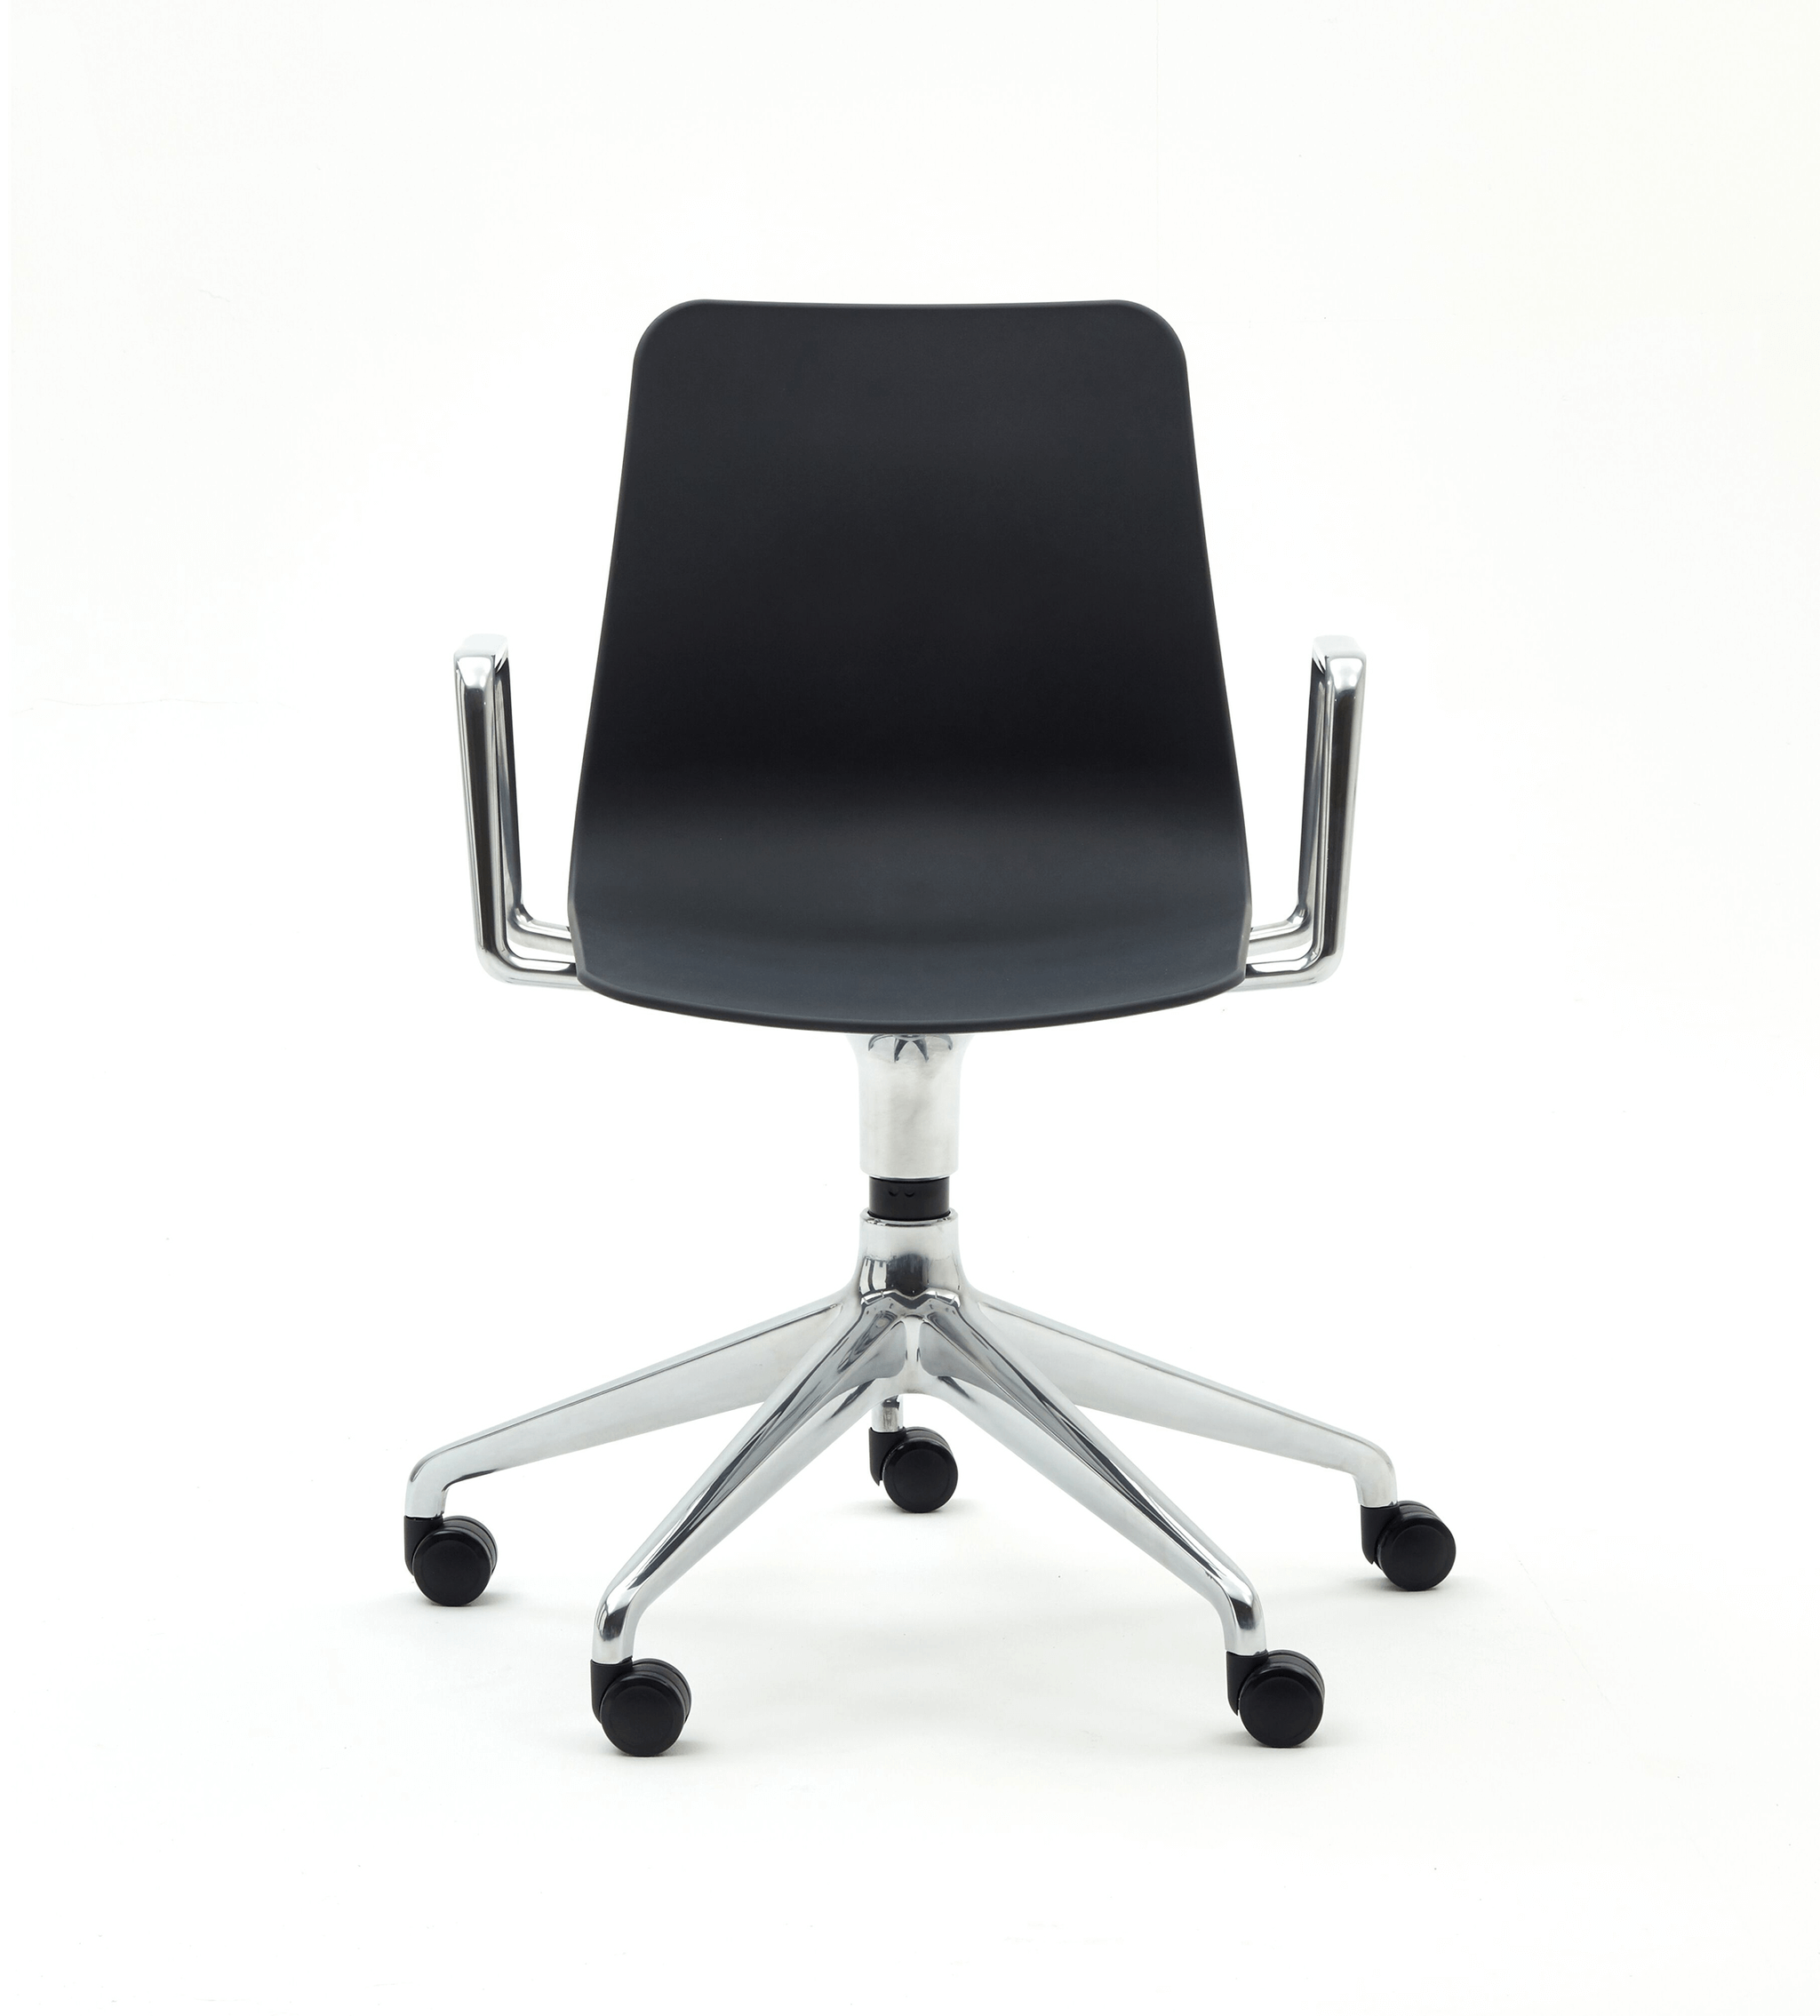 Polly side chair font with aluminium frame and leather with a white background